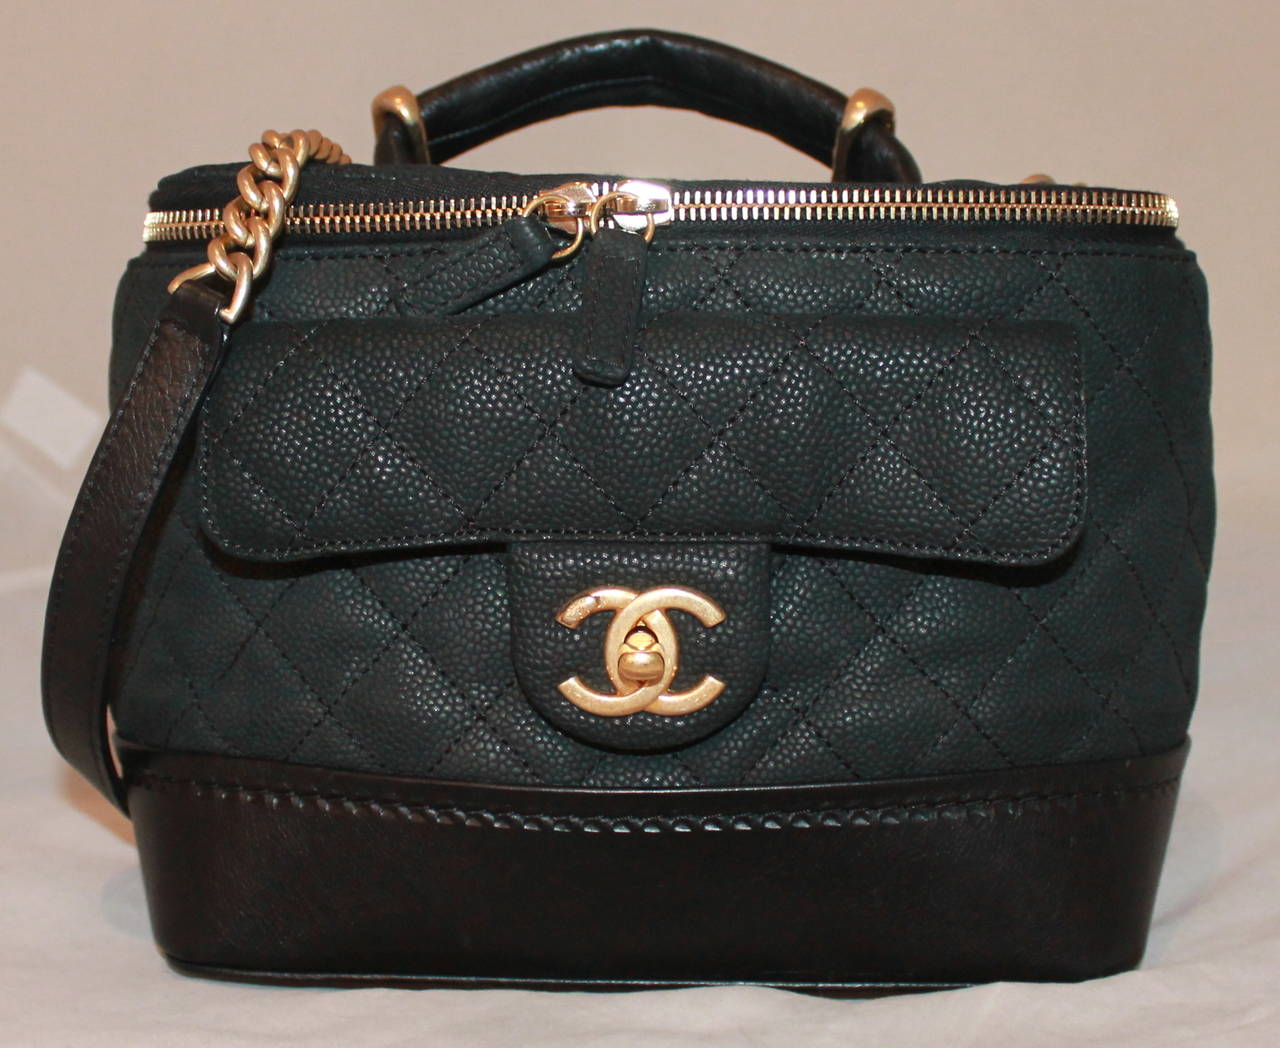 Chanel Black Leather Quilted Globe Trotter Handbag - circa 2014. This bag is in impeccable condition and comes with the box and duster.

Measurements:
Length- 7